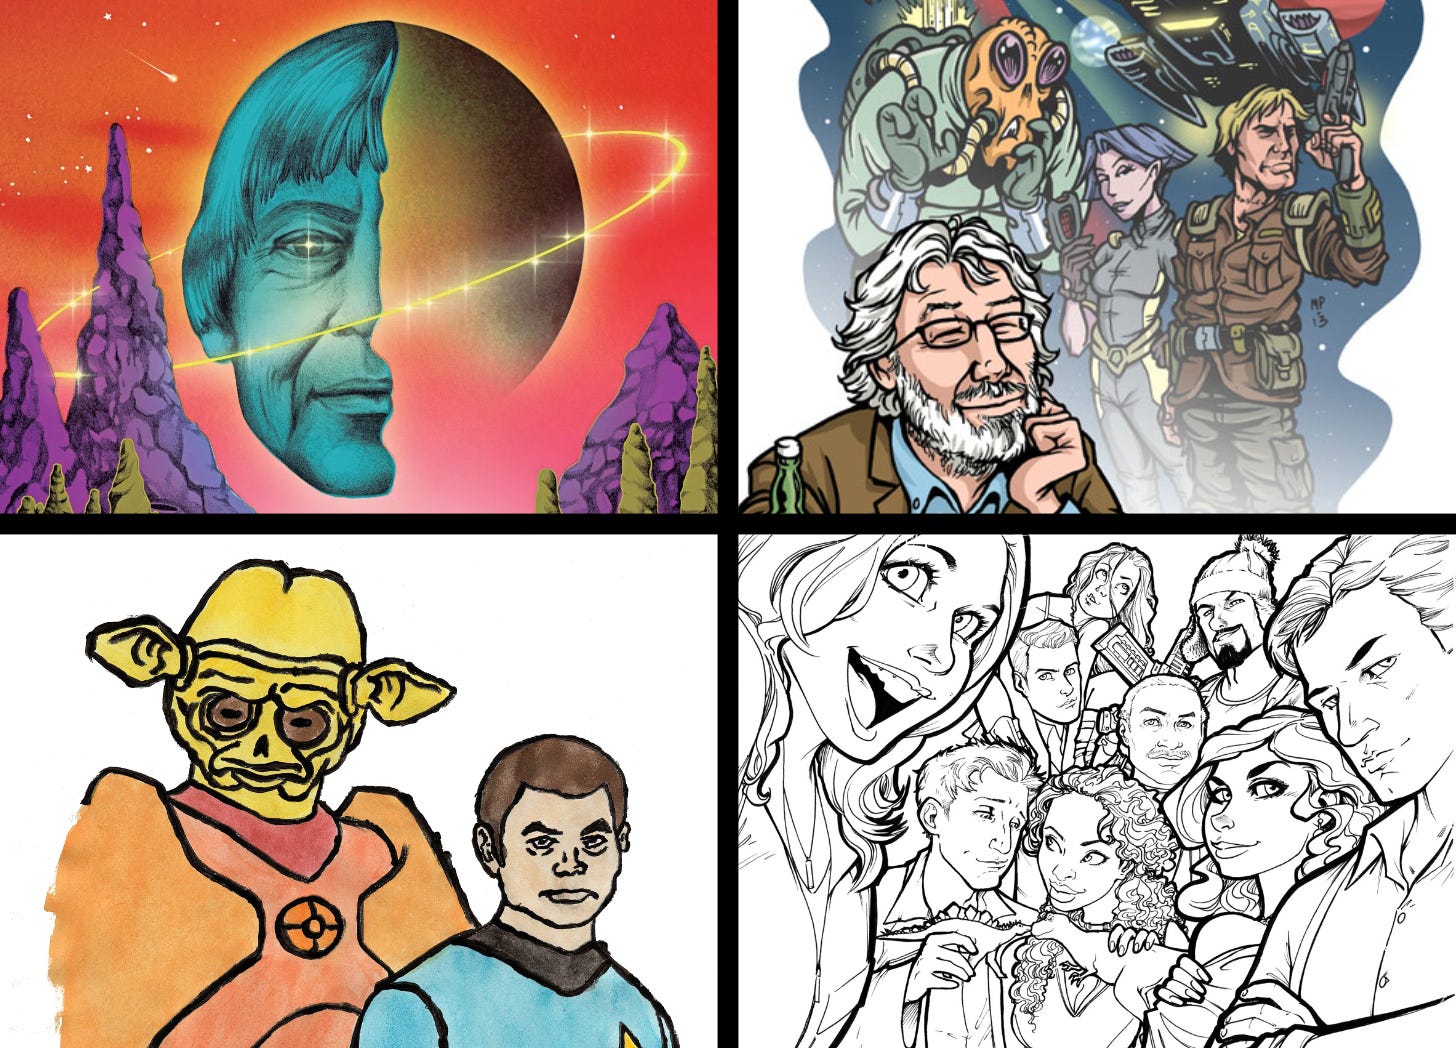 Four images: 70s sci-fi illustration of Ursula K. Le Guin, a cartoon of Iain M. Banks dreaming of sci-fi characters, a bad watercolor of McCoy and an alien from TAS, and a pencil illustration of the Firefly crew.